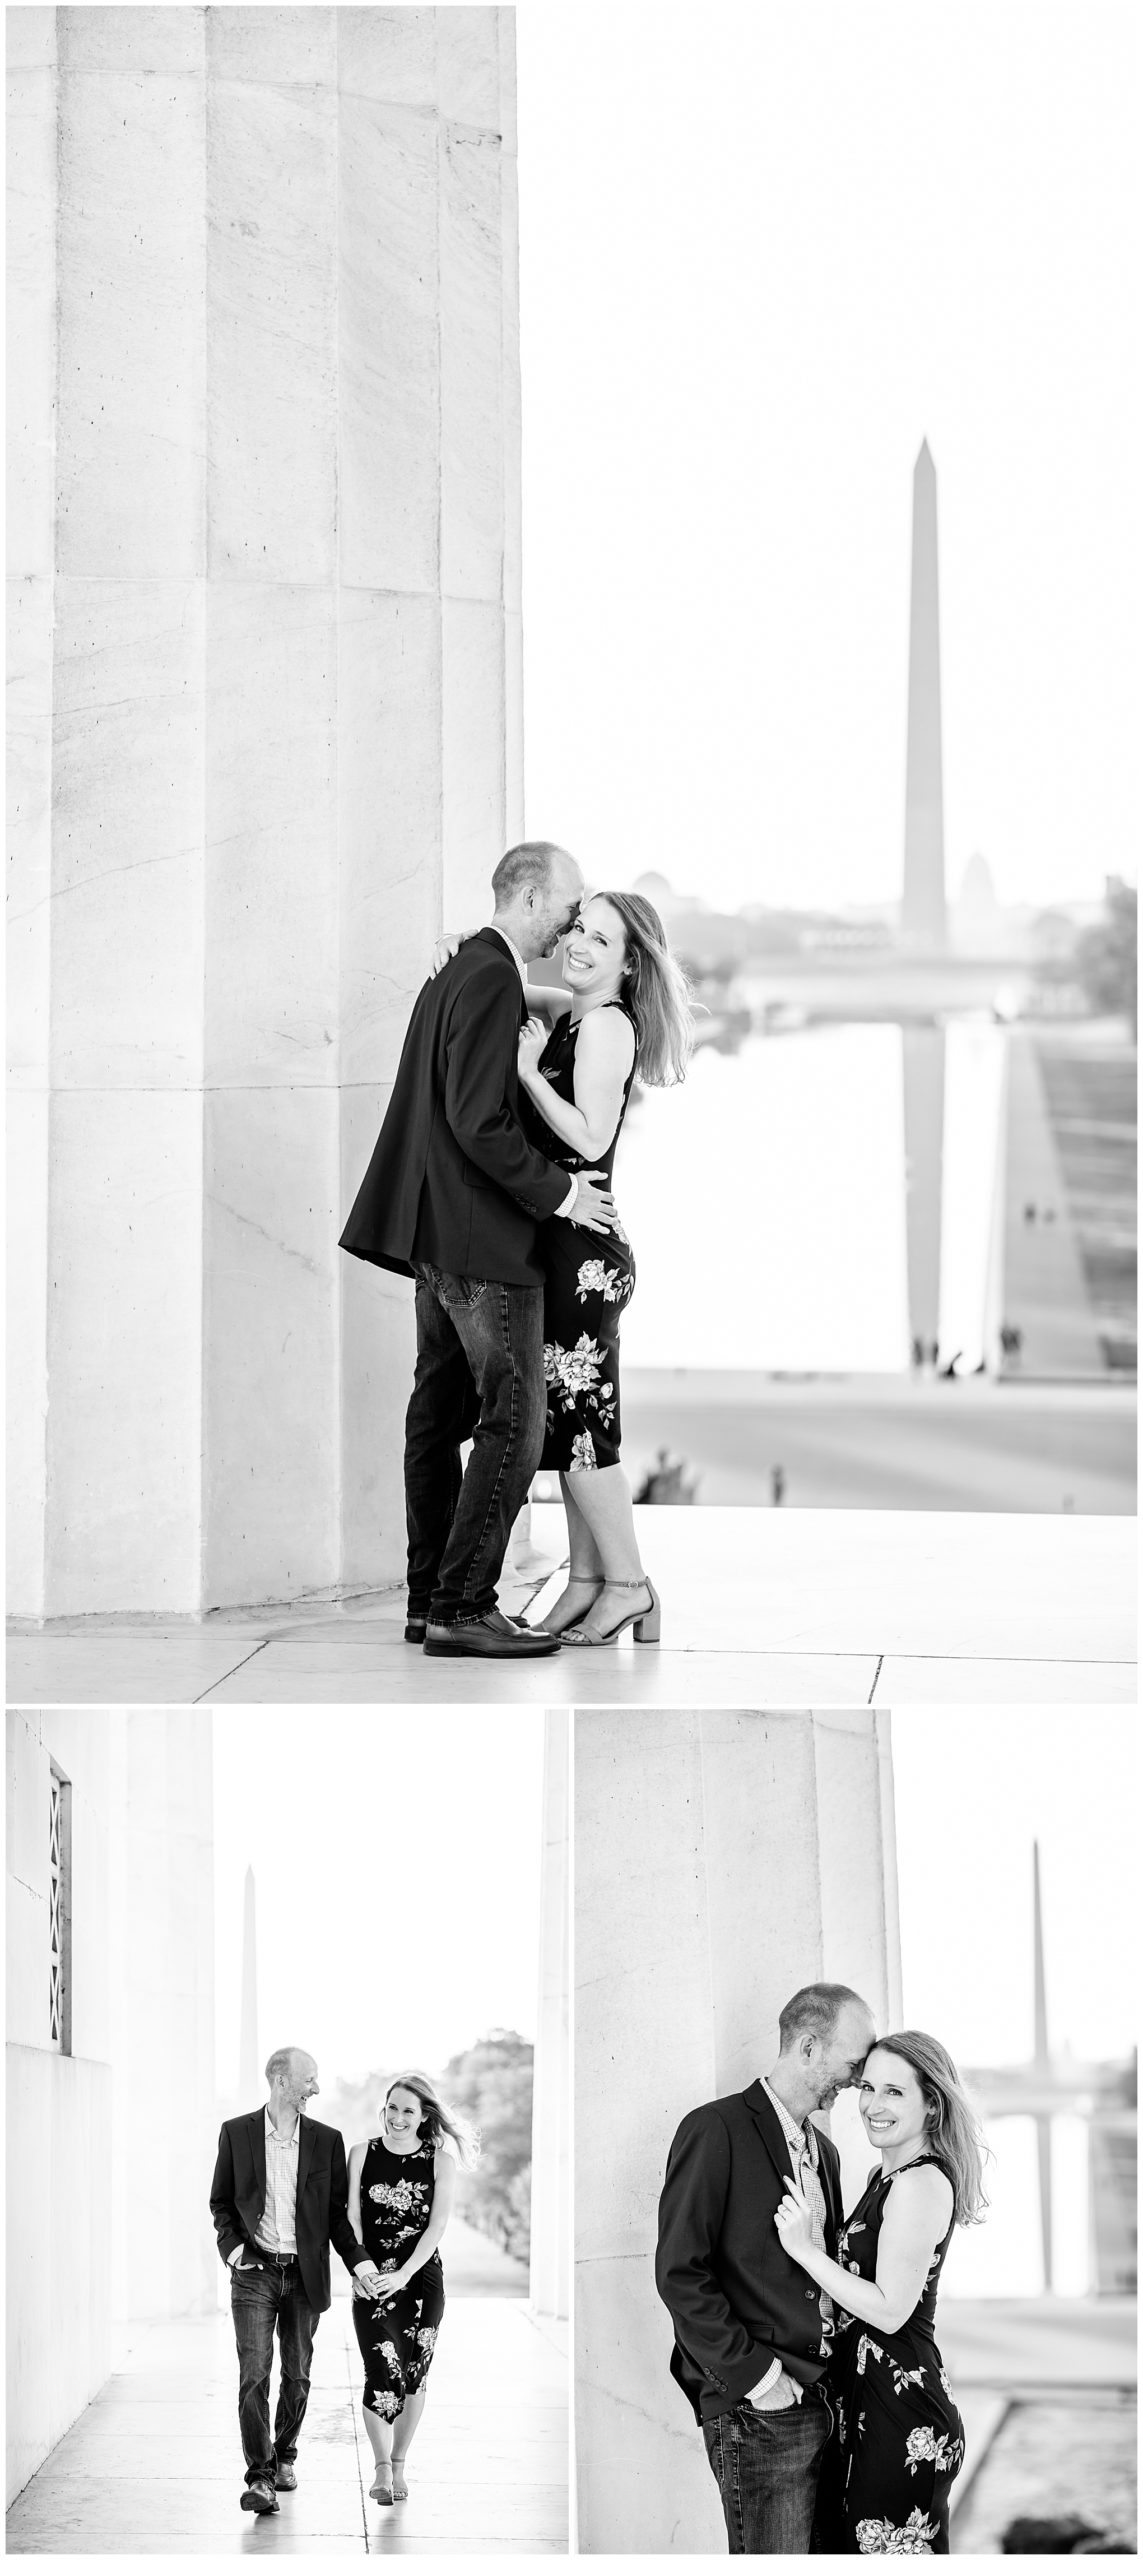 casual Lincoln Memorial engagement photos, casual engagement photos, DC engagement photos, DC engagement photographer, DC wedding photographer, natural light engagement photos, National Mall engagement photos, Rachel E.H. Photography, summer engagement photos, DC couple, LINCOLN MEMORIAL engagement photos, black and white engagement photos